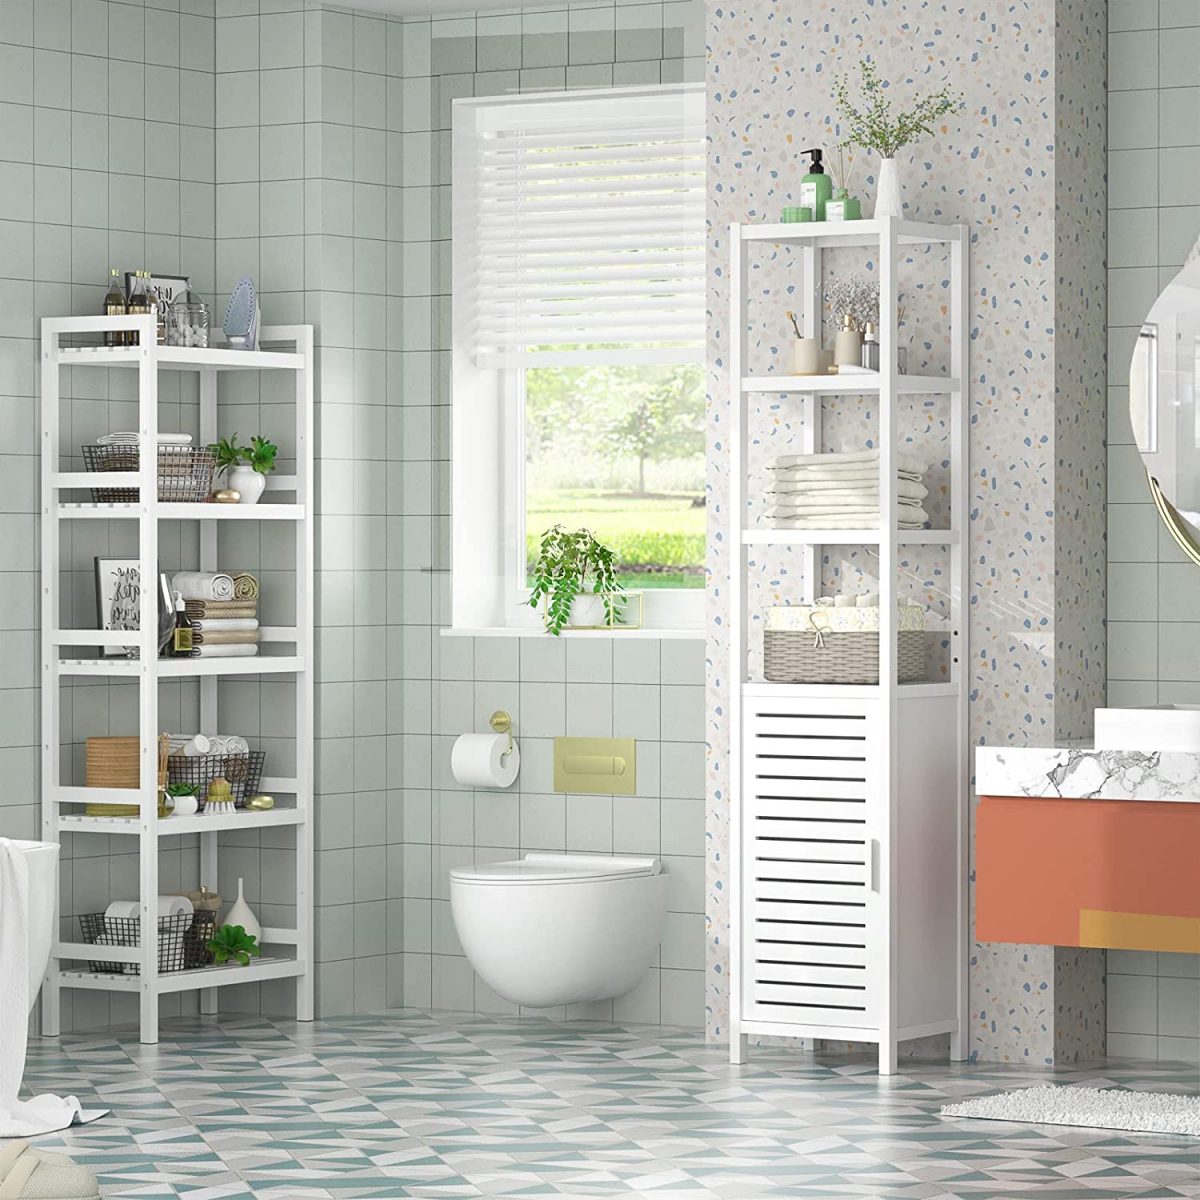 Over the toilet storage: 7 ways to do it smartly - IKEA Hackers